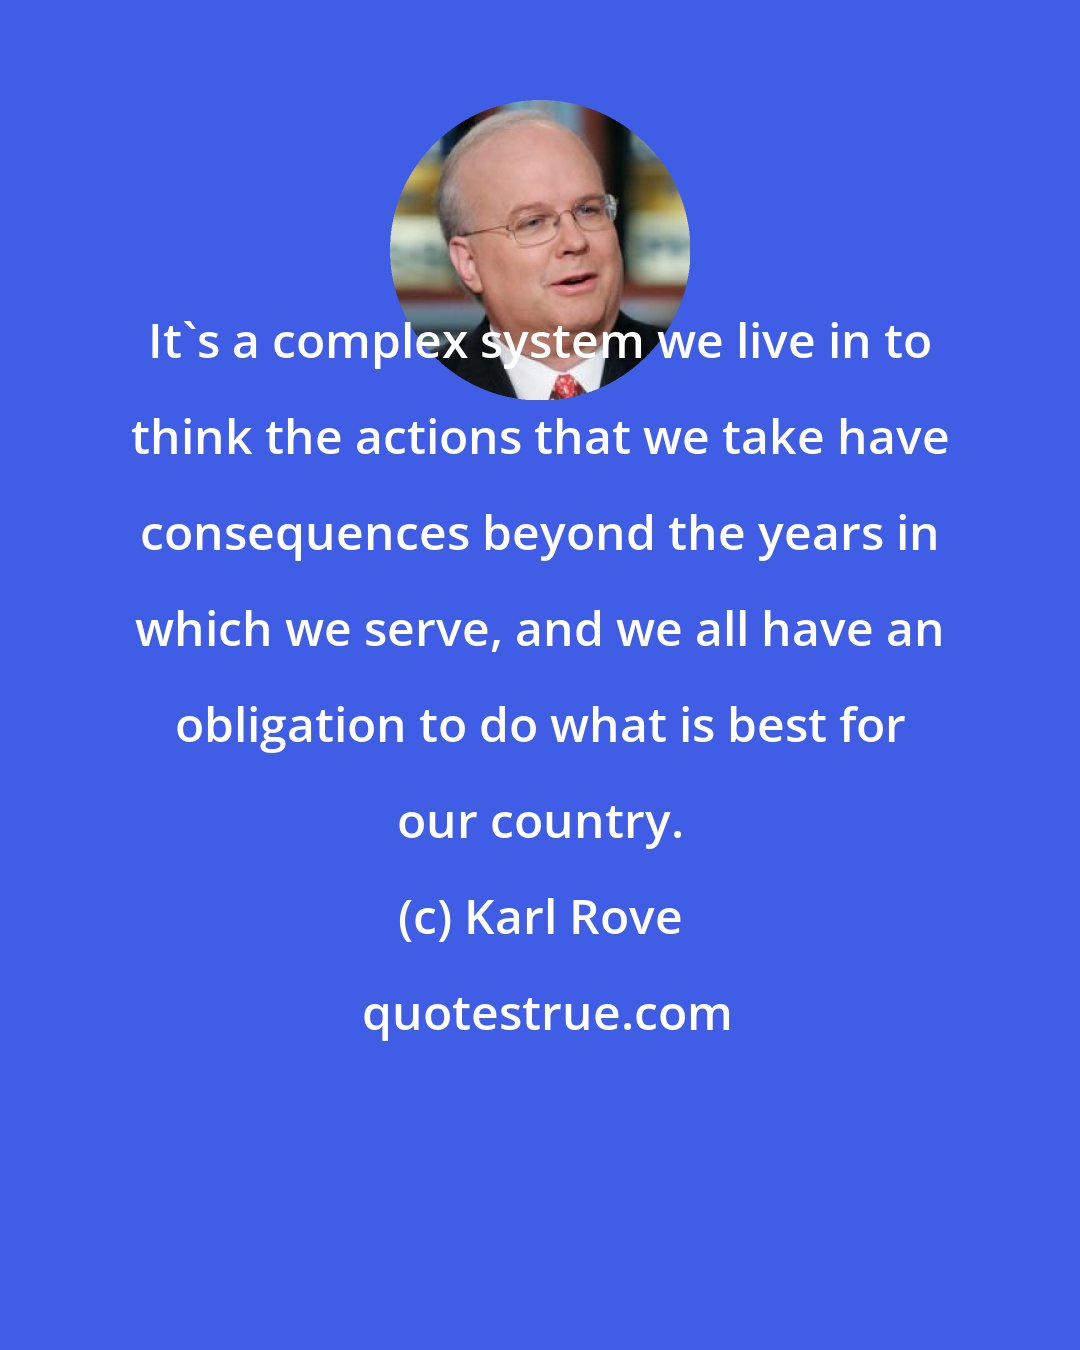 Karl Rove: It's a complex system we live in to think the actions that we take have consequences beyond the years in which we serve, and we all have an obligation to do what is best for our country.